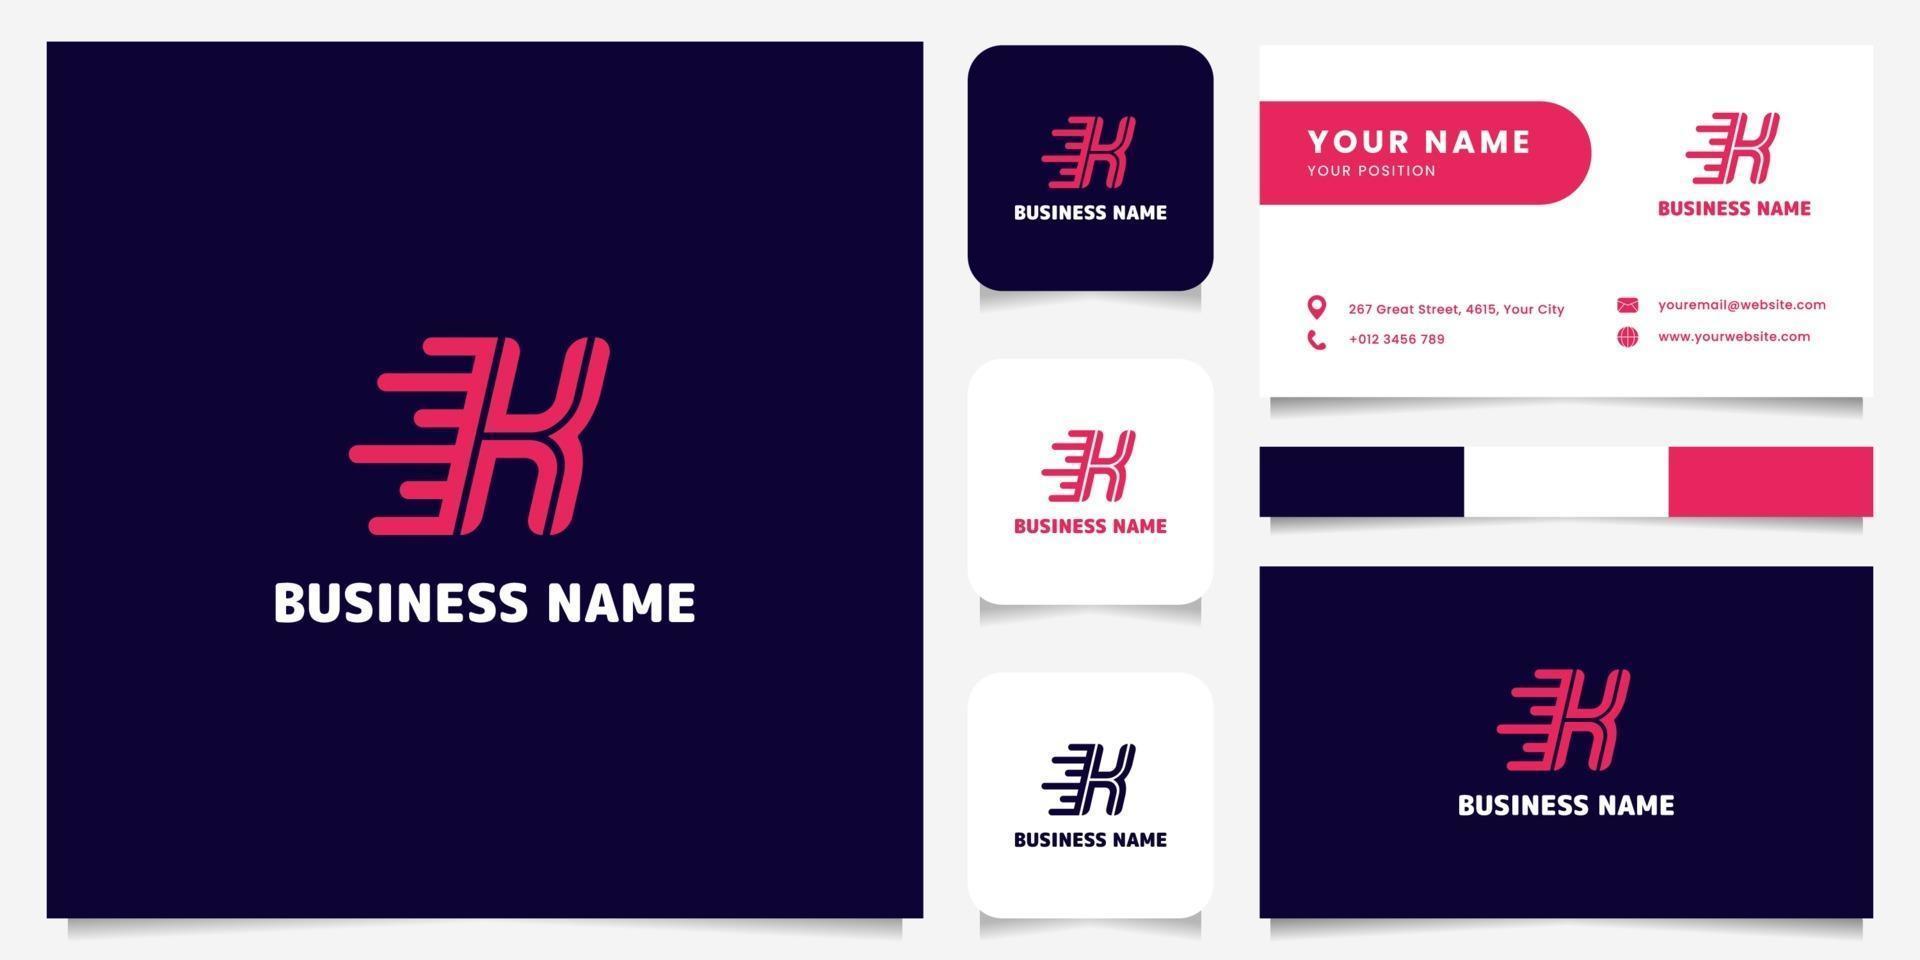 Simple and Minimalist Bright Pink Letter K Speed Logo in Dark Background Logo with Business Card Template vector